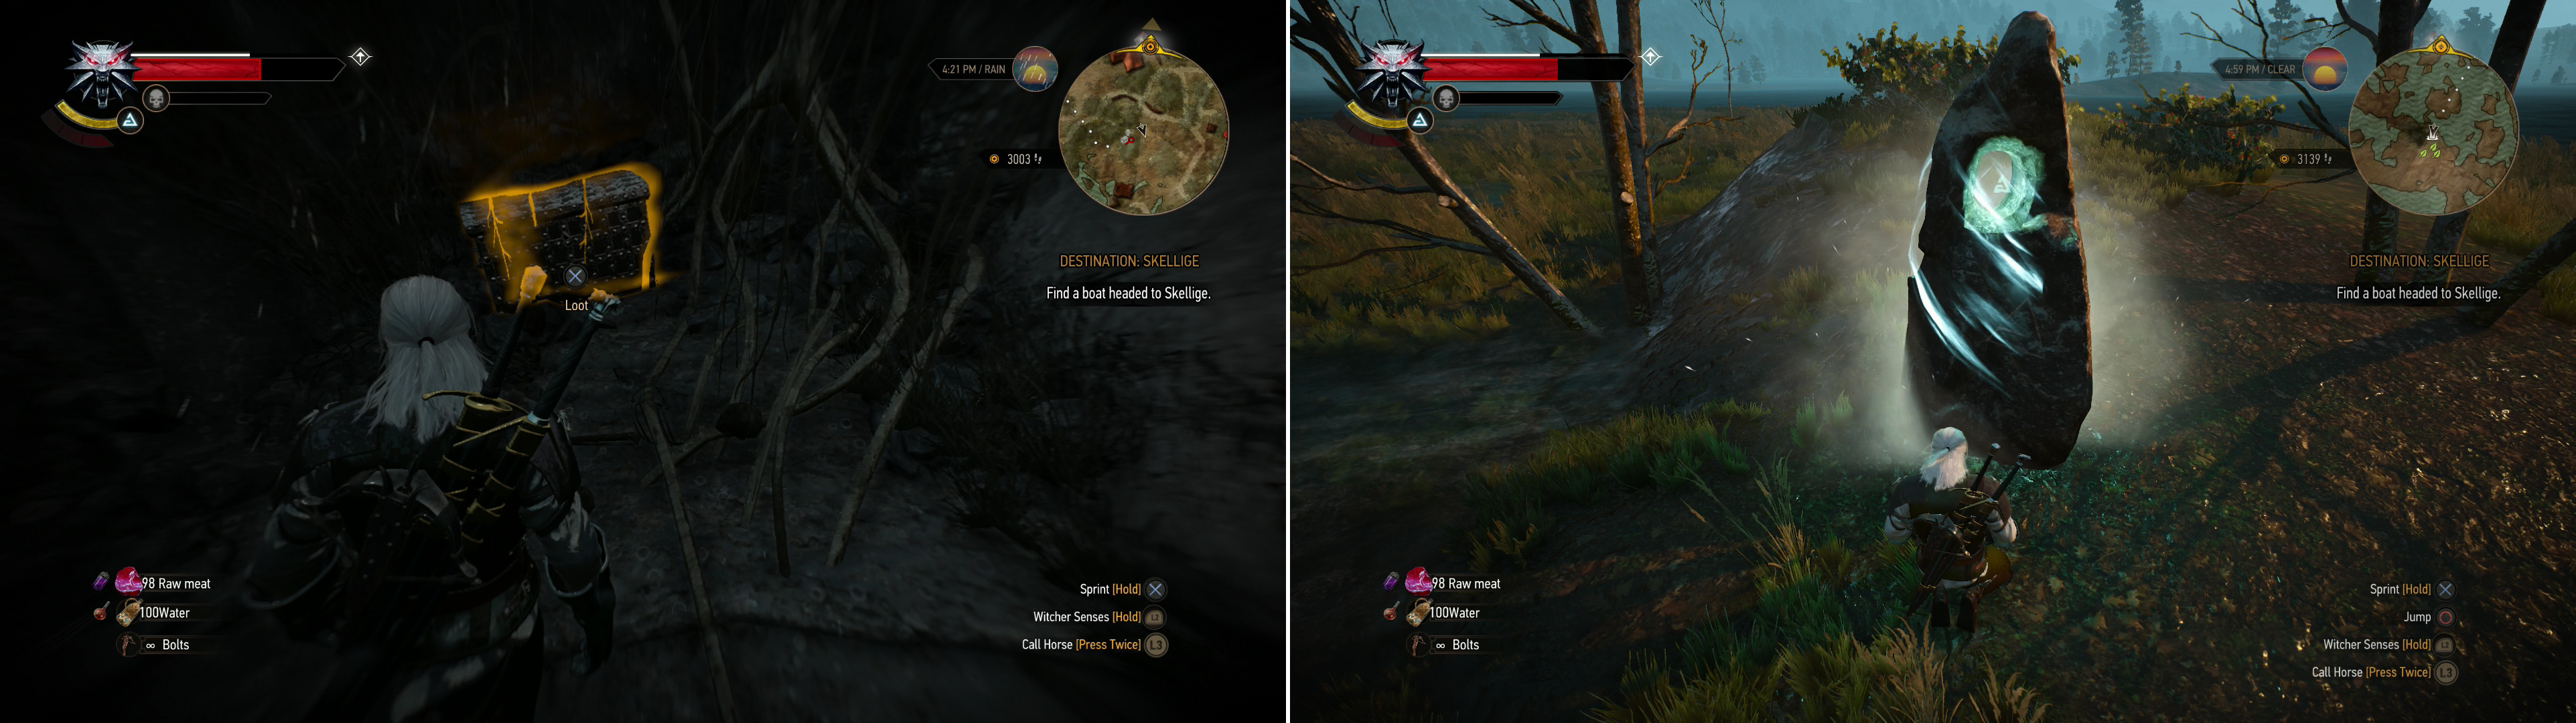 Use Aard to blast your way into a cave, where you'll find the Diagram: Enhanced Griffin Gauntlets in a chest (left). South of Frischlow you'll find a Place of Power (right).